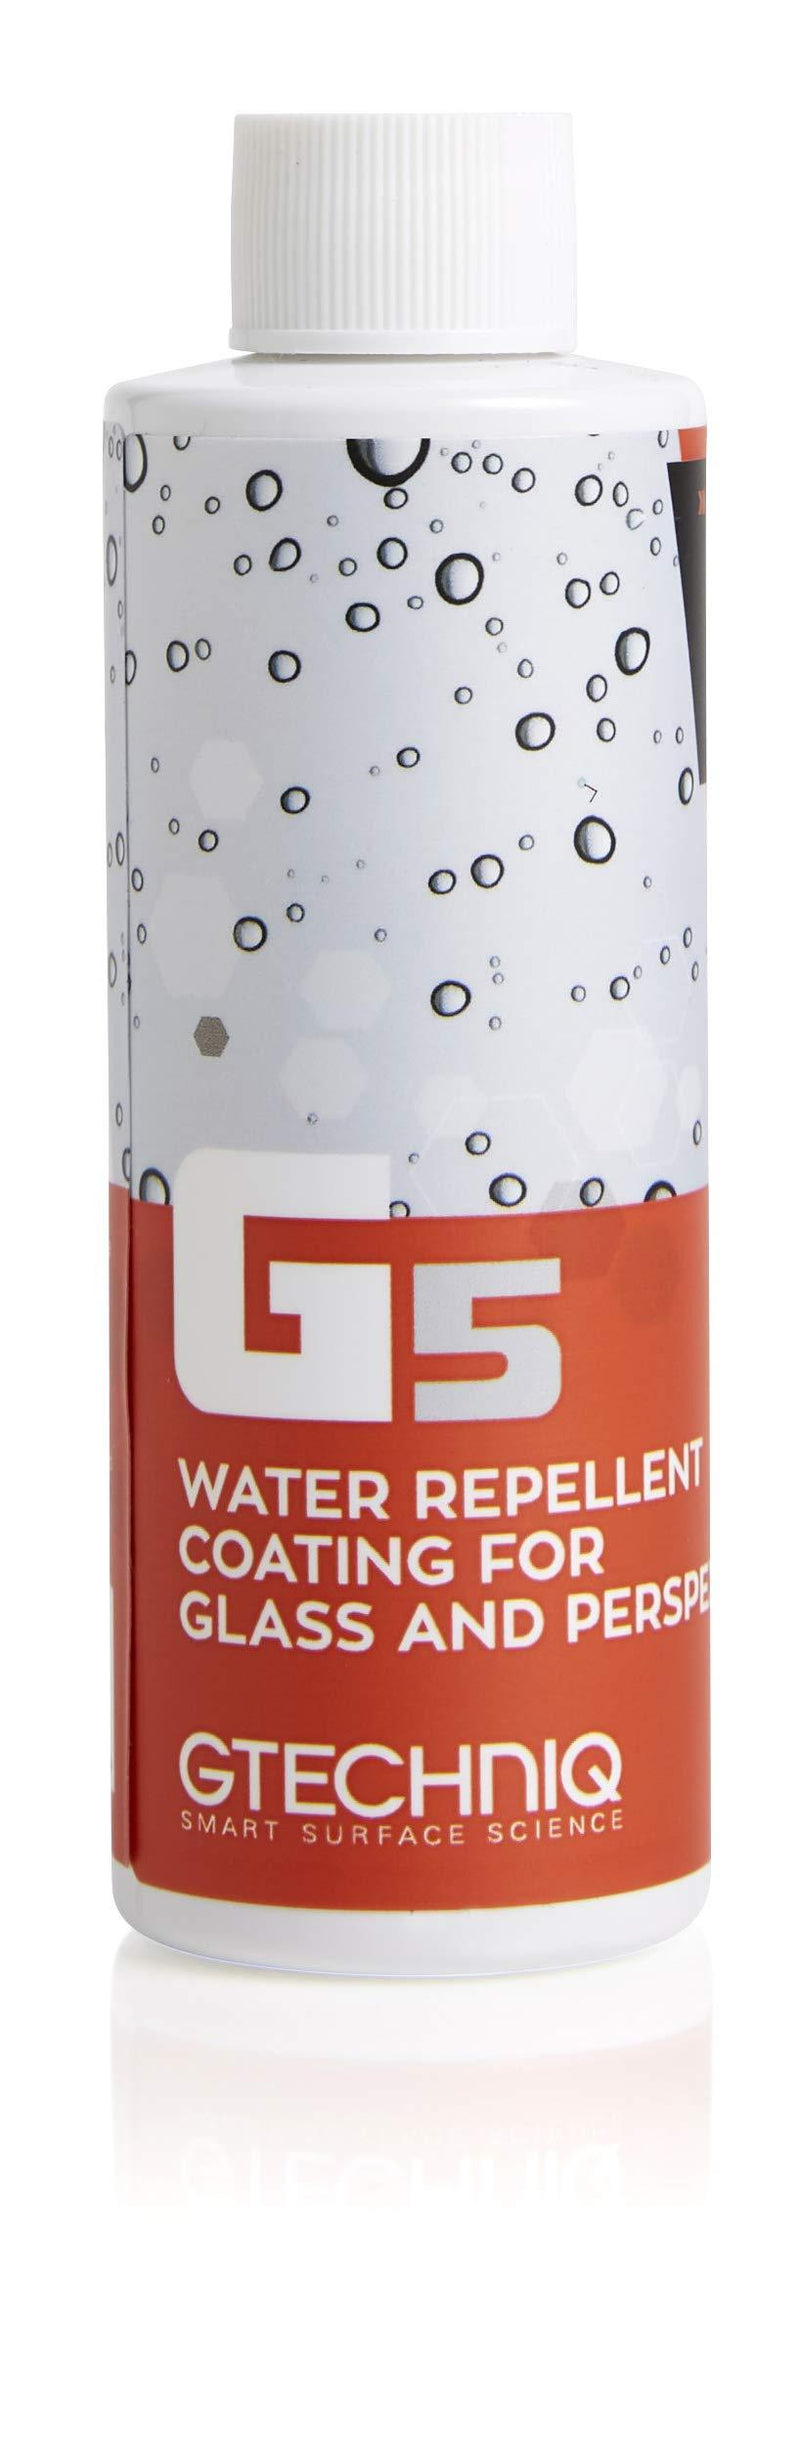  [AUSTRALIA] - Gtechniq G5 Water Repellent Coating for Glass and Perspex 100ml